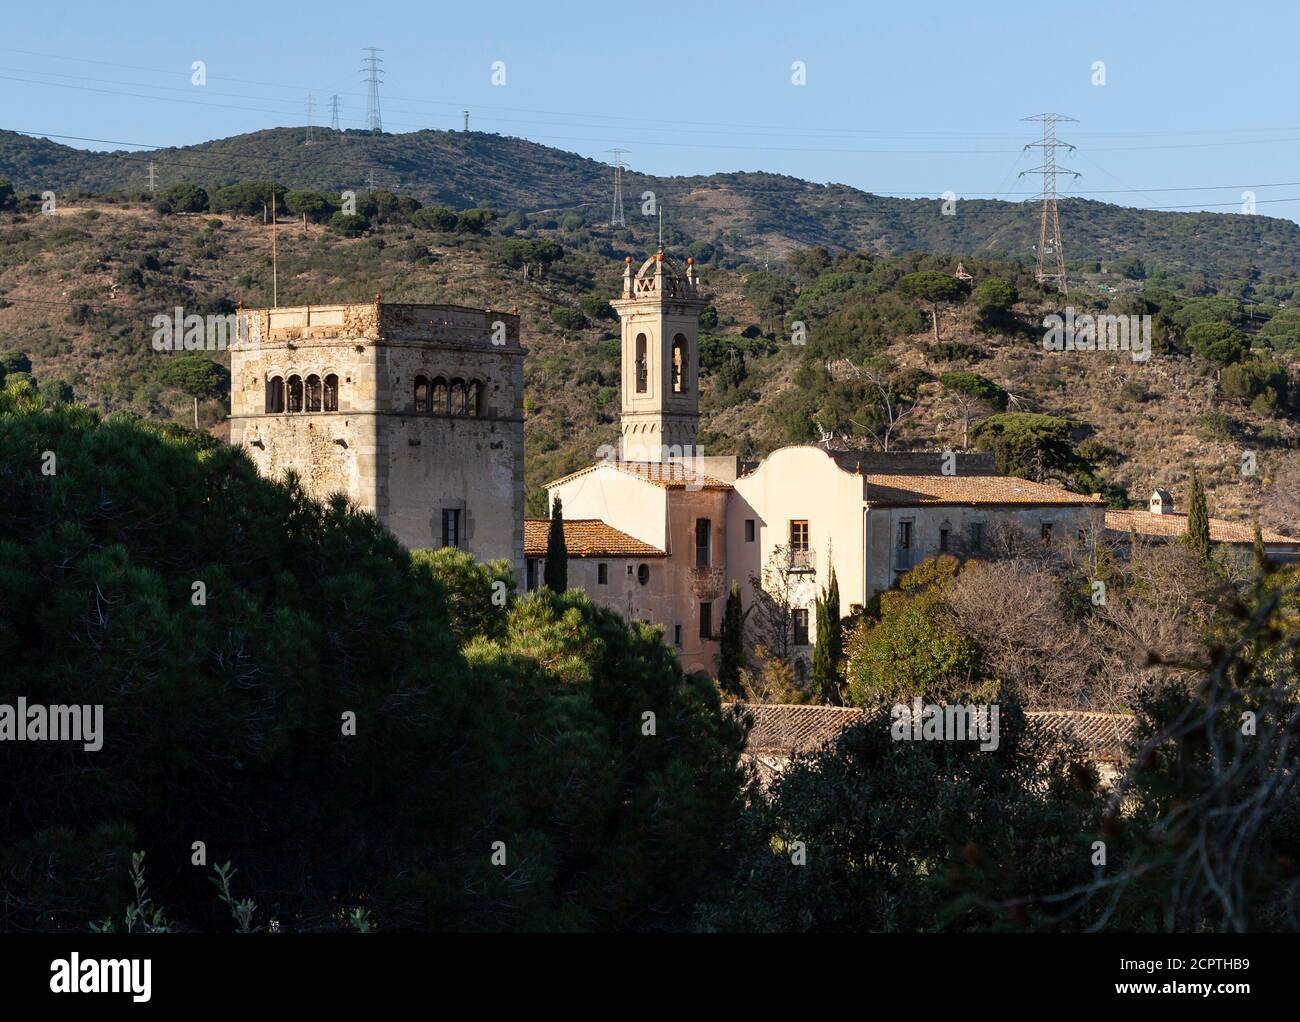 Sant Jeroni de la Murtra Monastery, built in the 14th century, is where the Catholic Monarchs received Christopher Columbus after his first voyage to Stock Photo